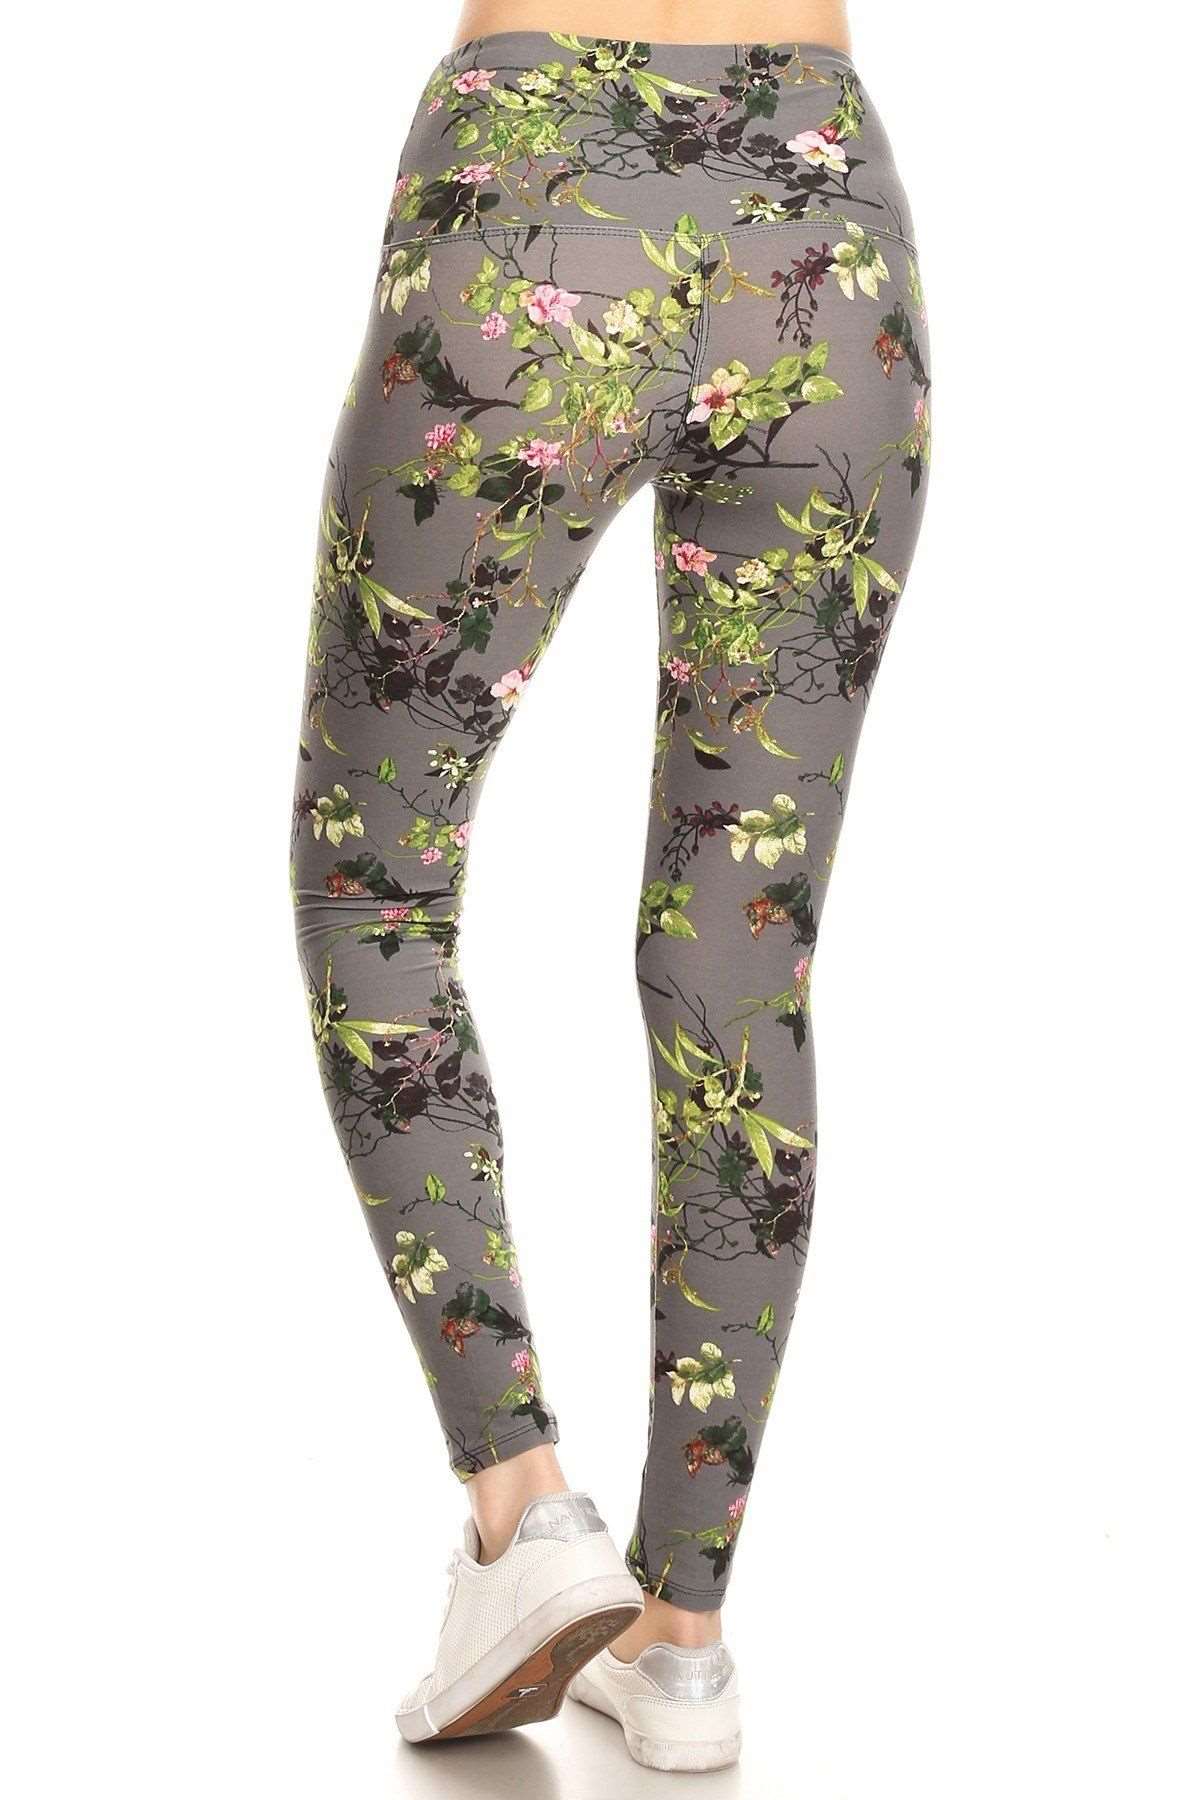 5-inch Long Yoga Style Banded Lined Floral Printed Knit Legging With High Waist 5-inch Long Yoga Style Banded Lined Floral Printed Knit Legging With High Waist - M&R CORNER M&R CORNER